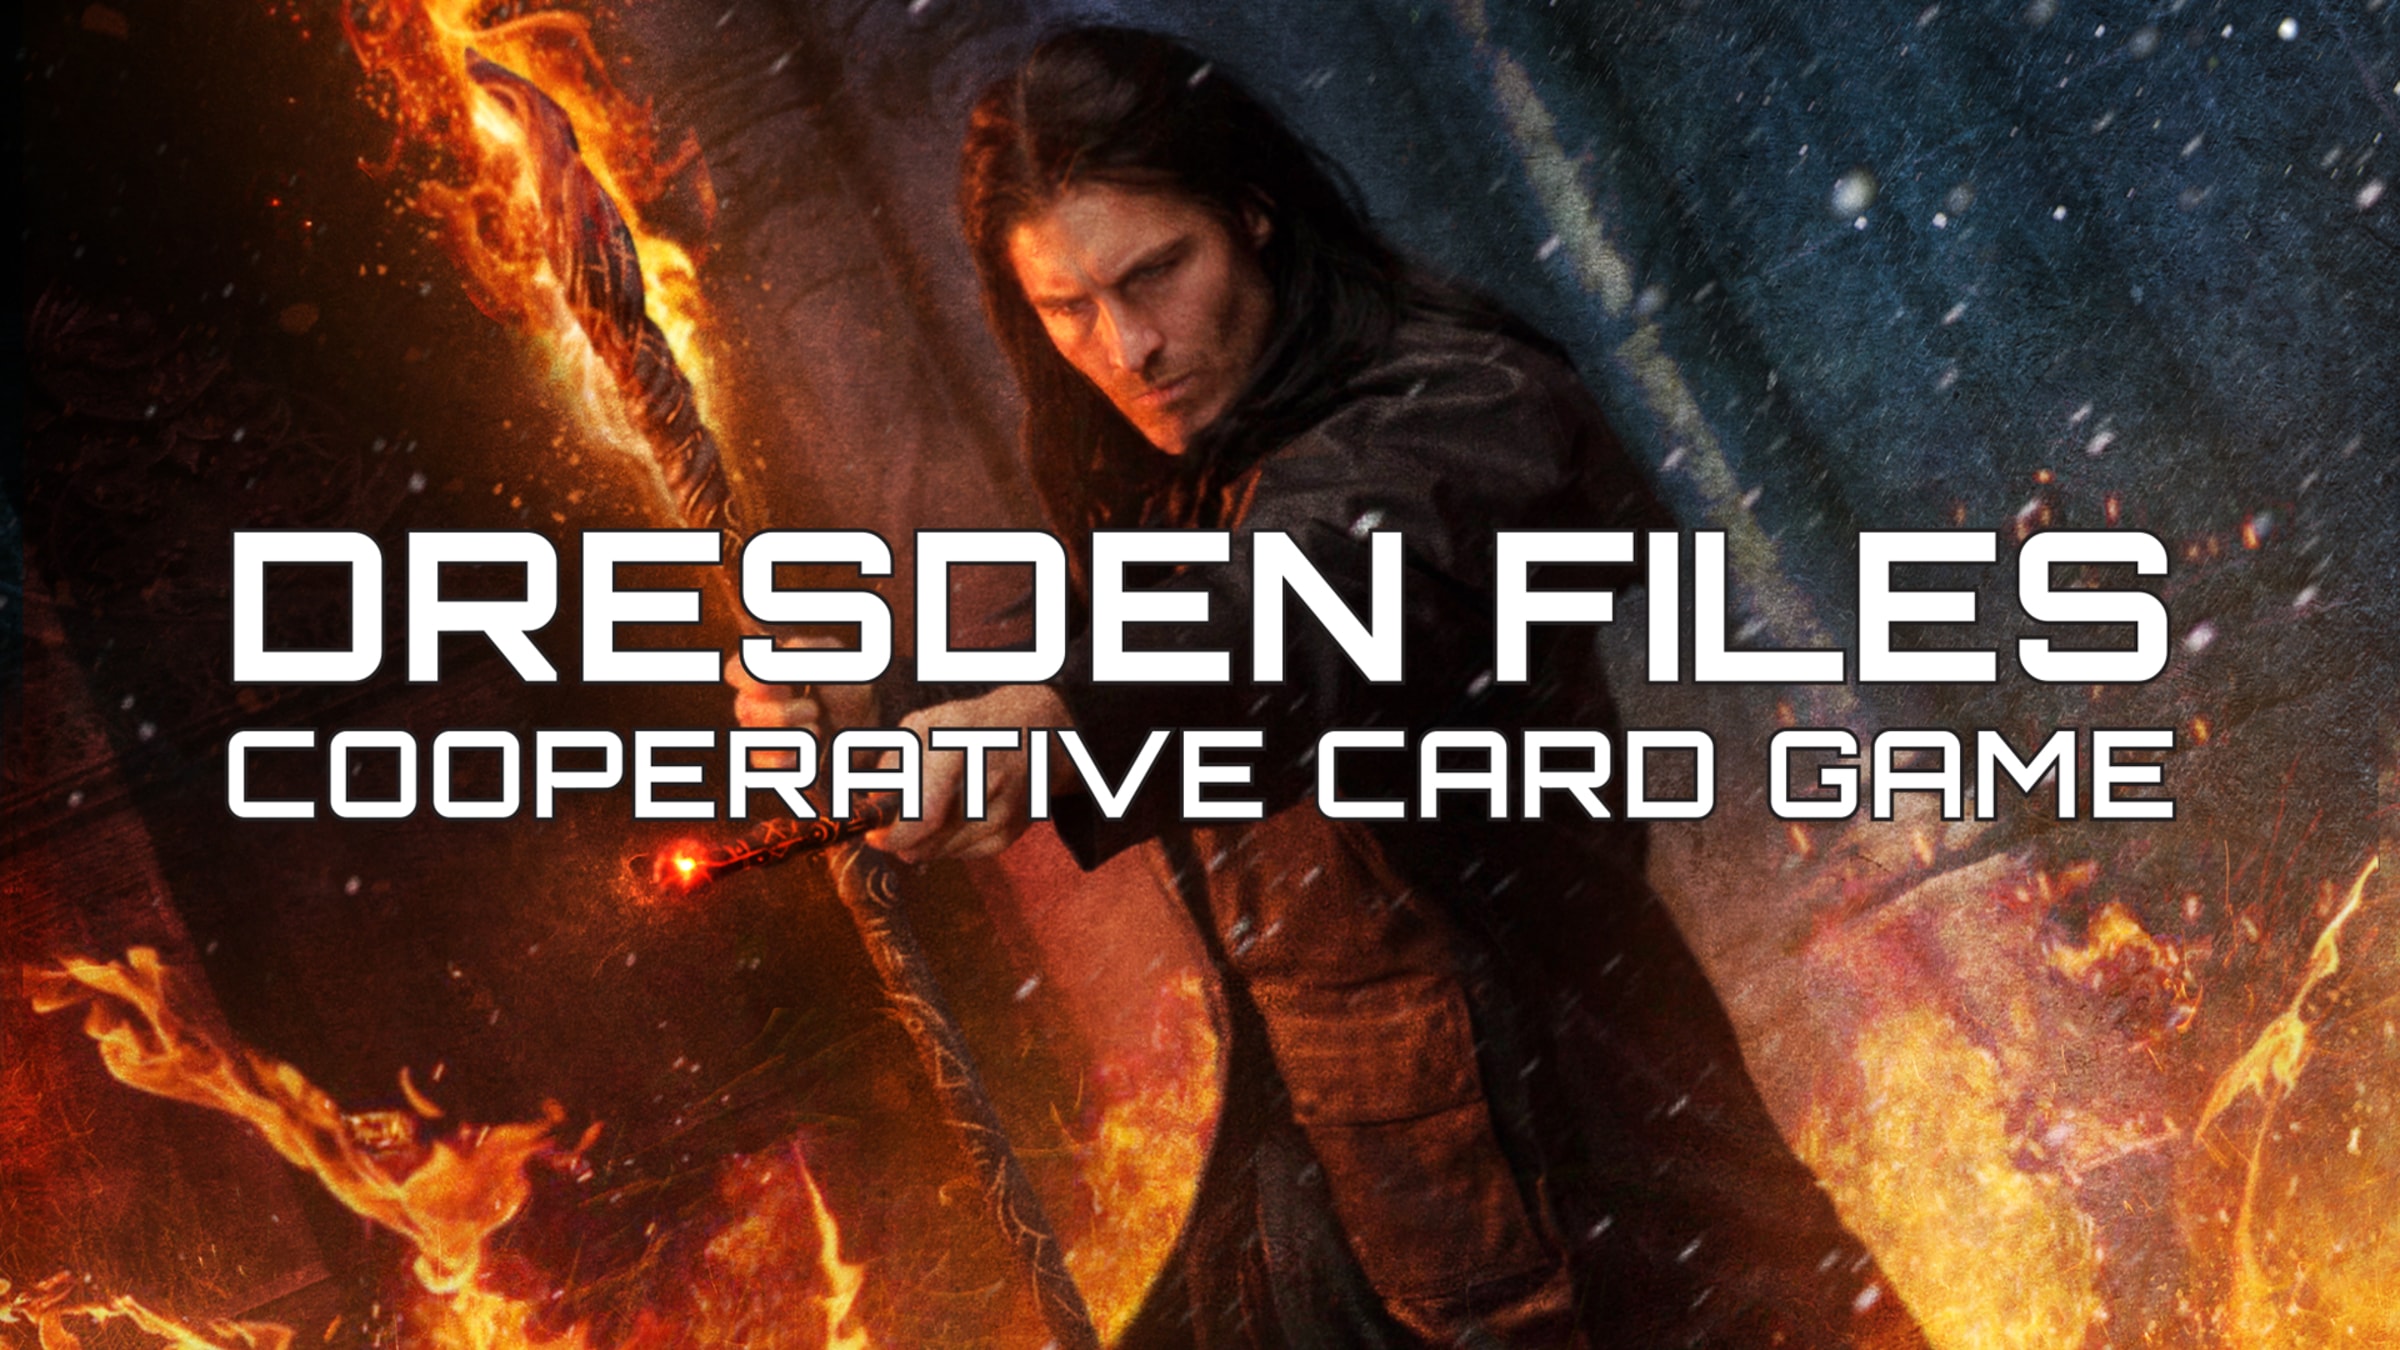 The Dresden Files Cooperative Card Game for Nintendo Switch